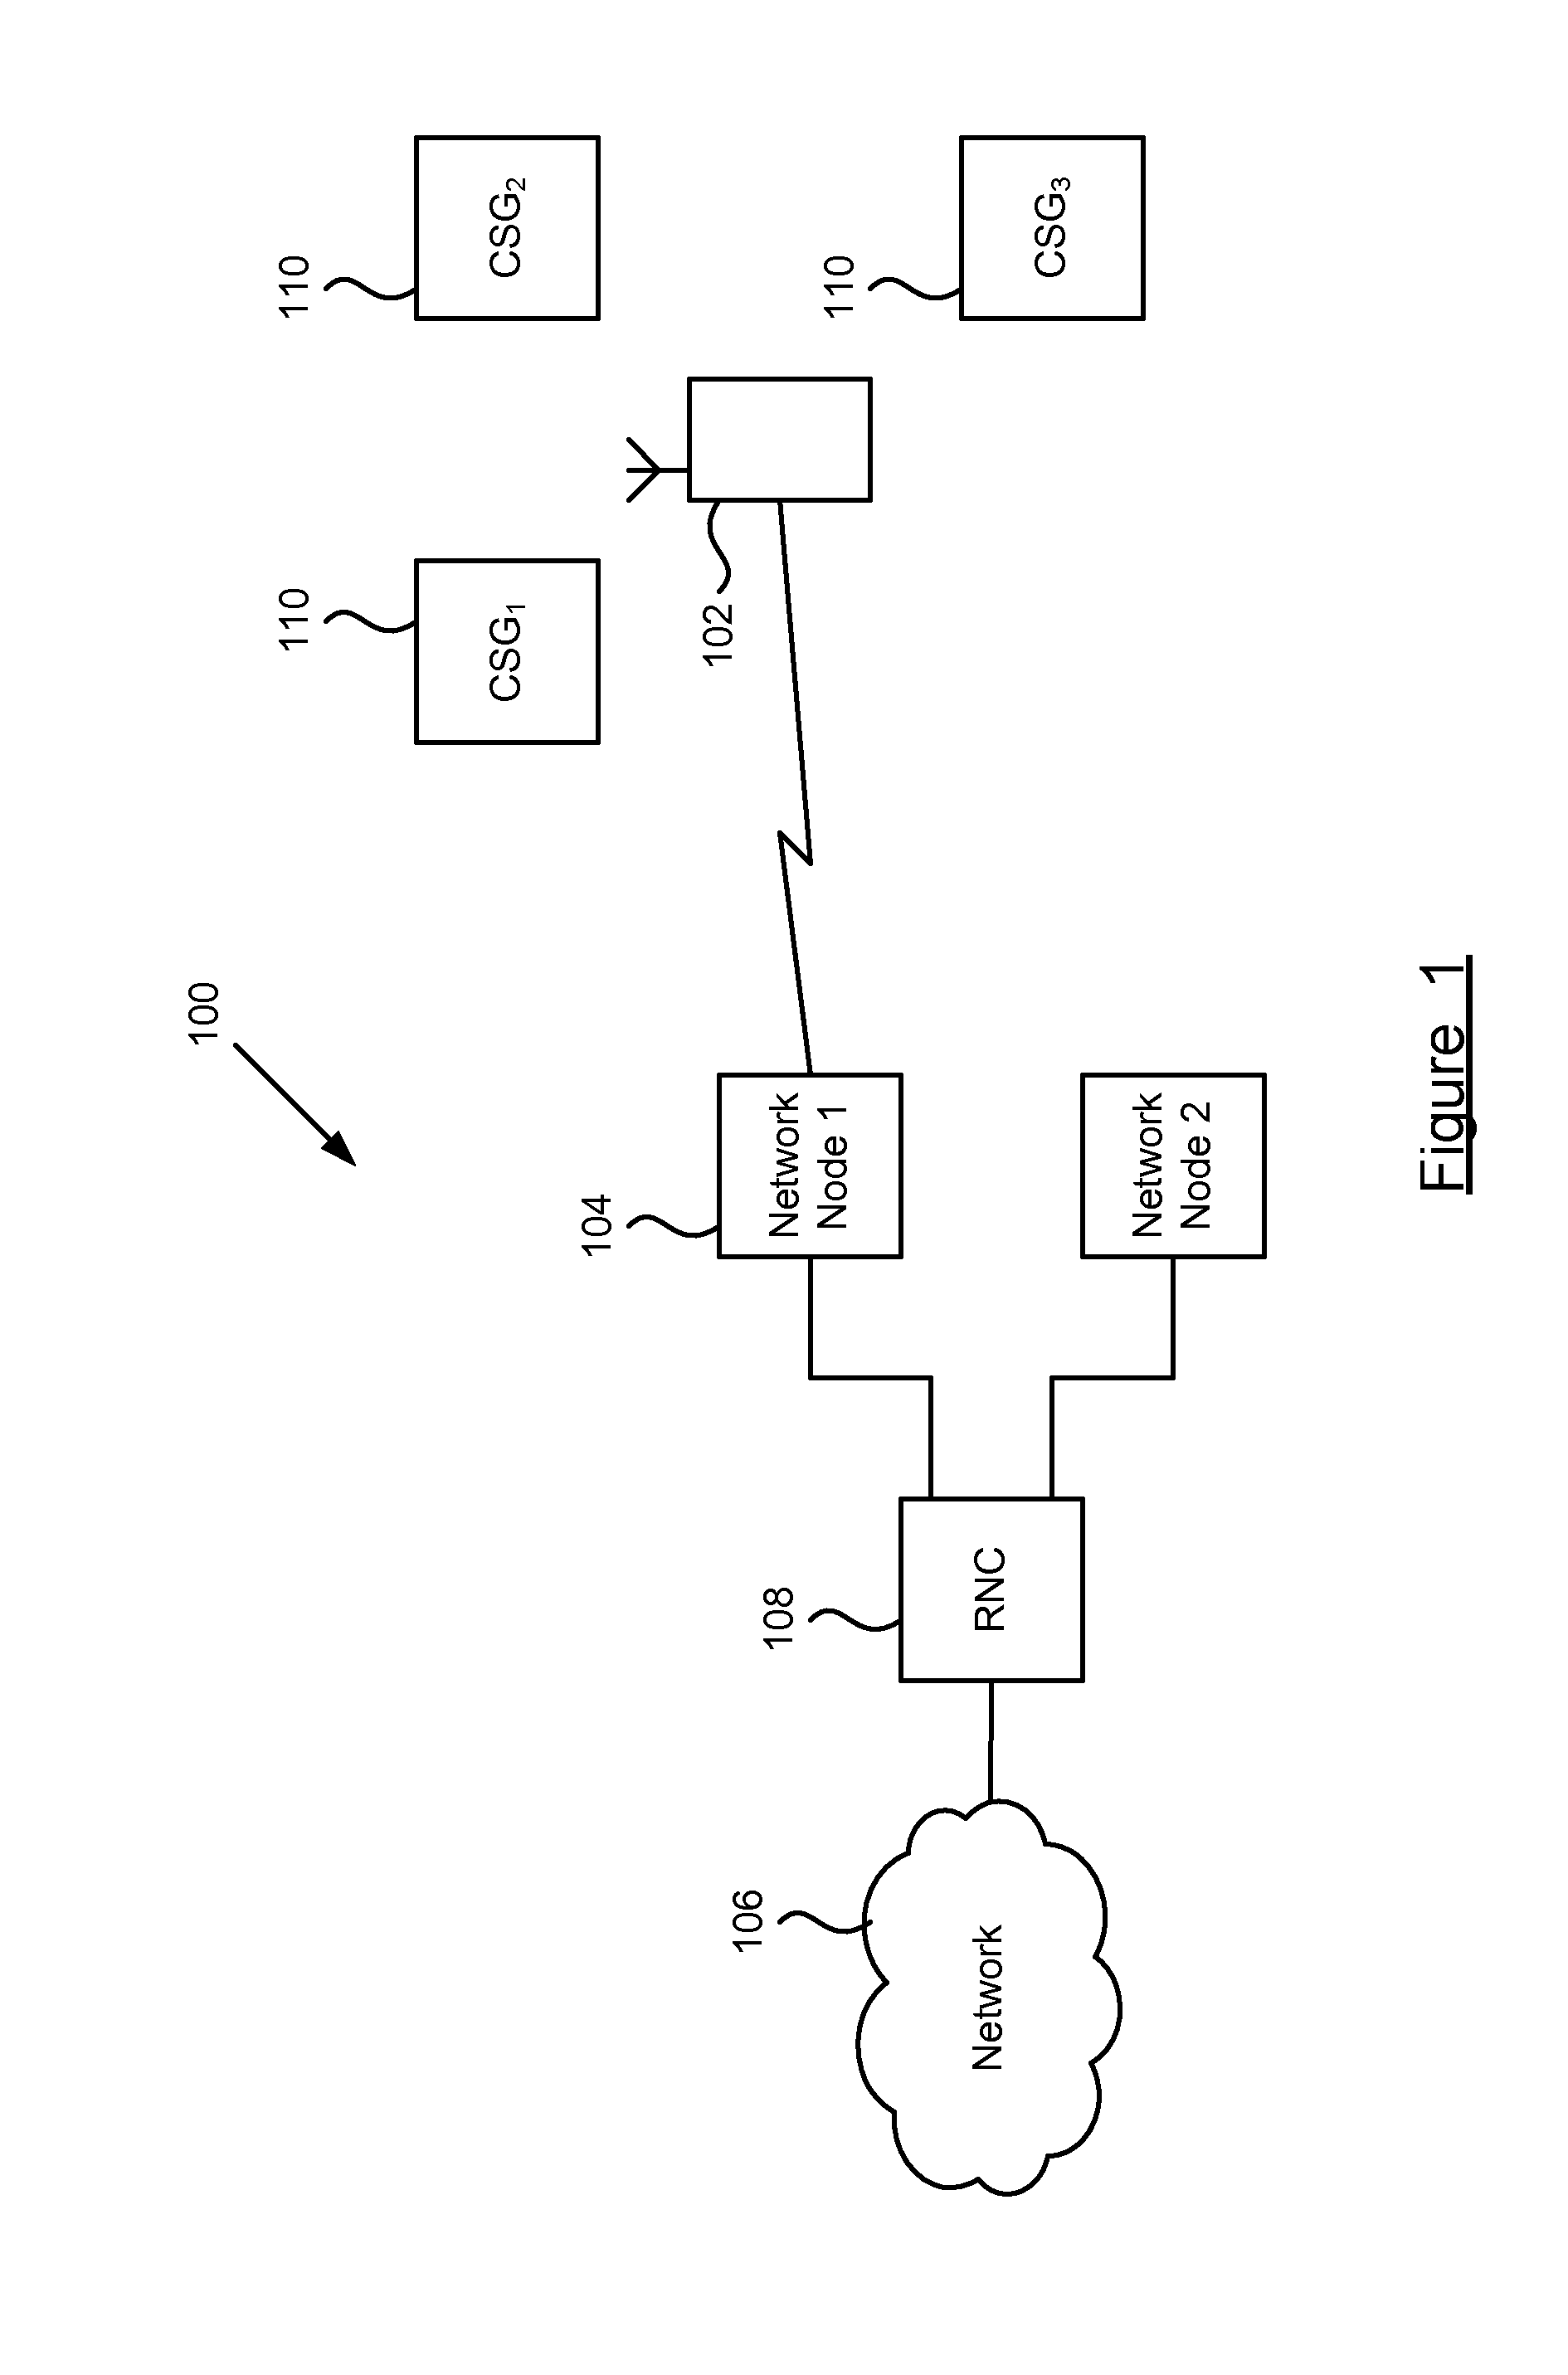 Method and Apparatus for Maintaining a Virtual Active Set Including a Closed Subscriber Group Cell